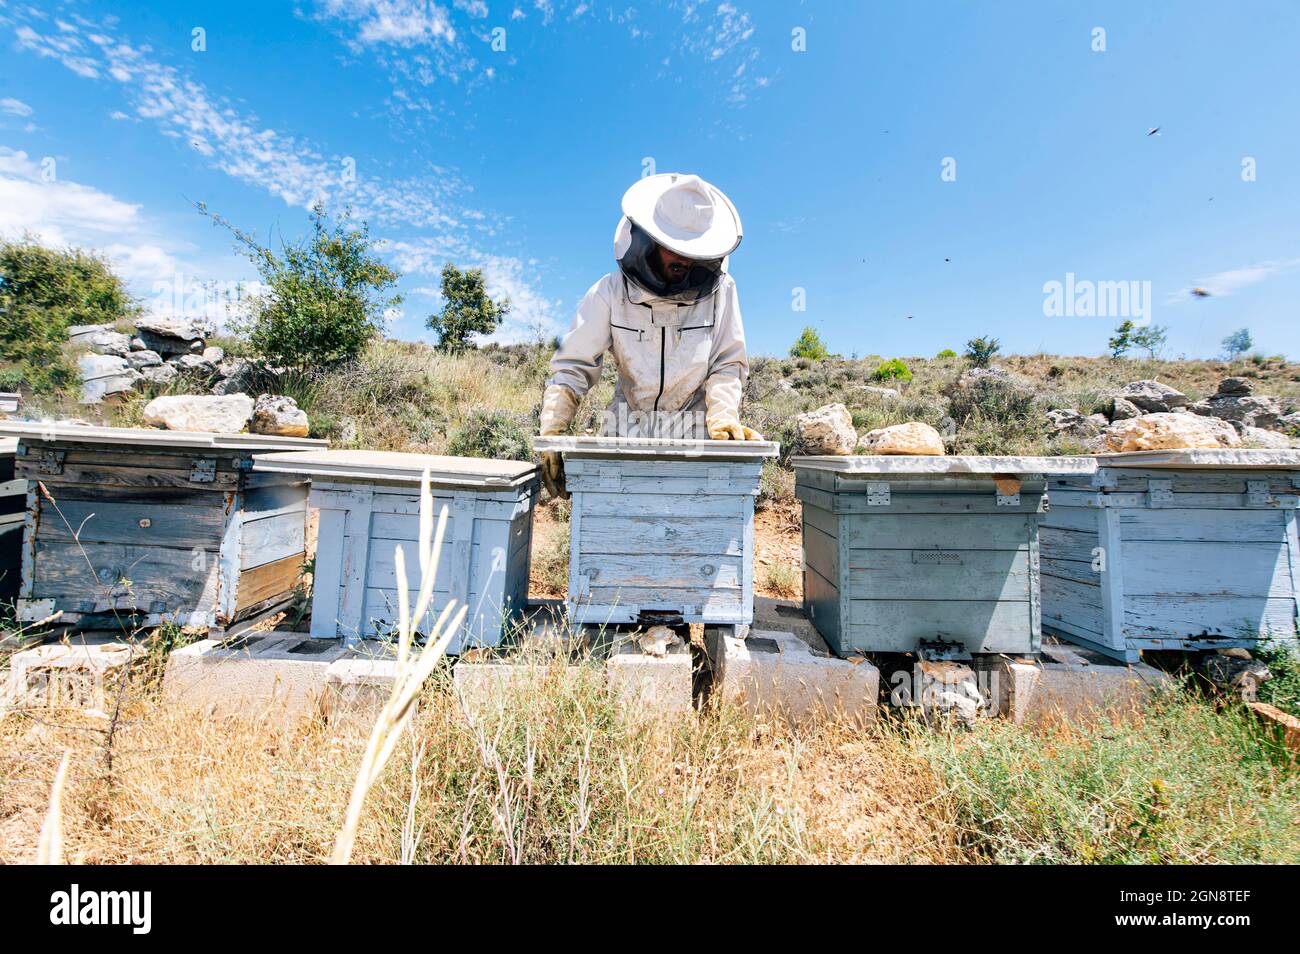 Male beekeeper working at farm Stock Photo